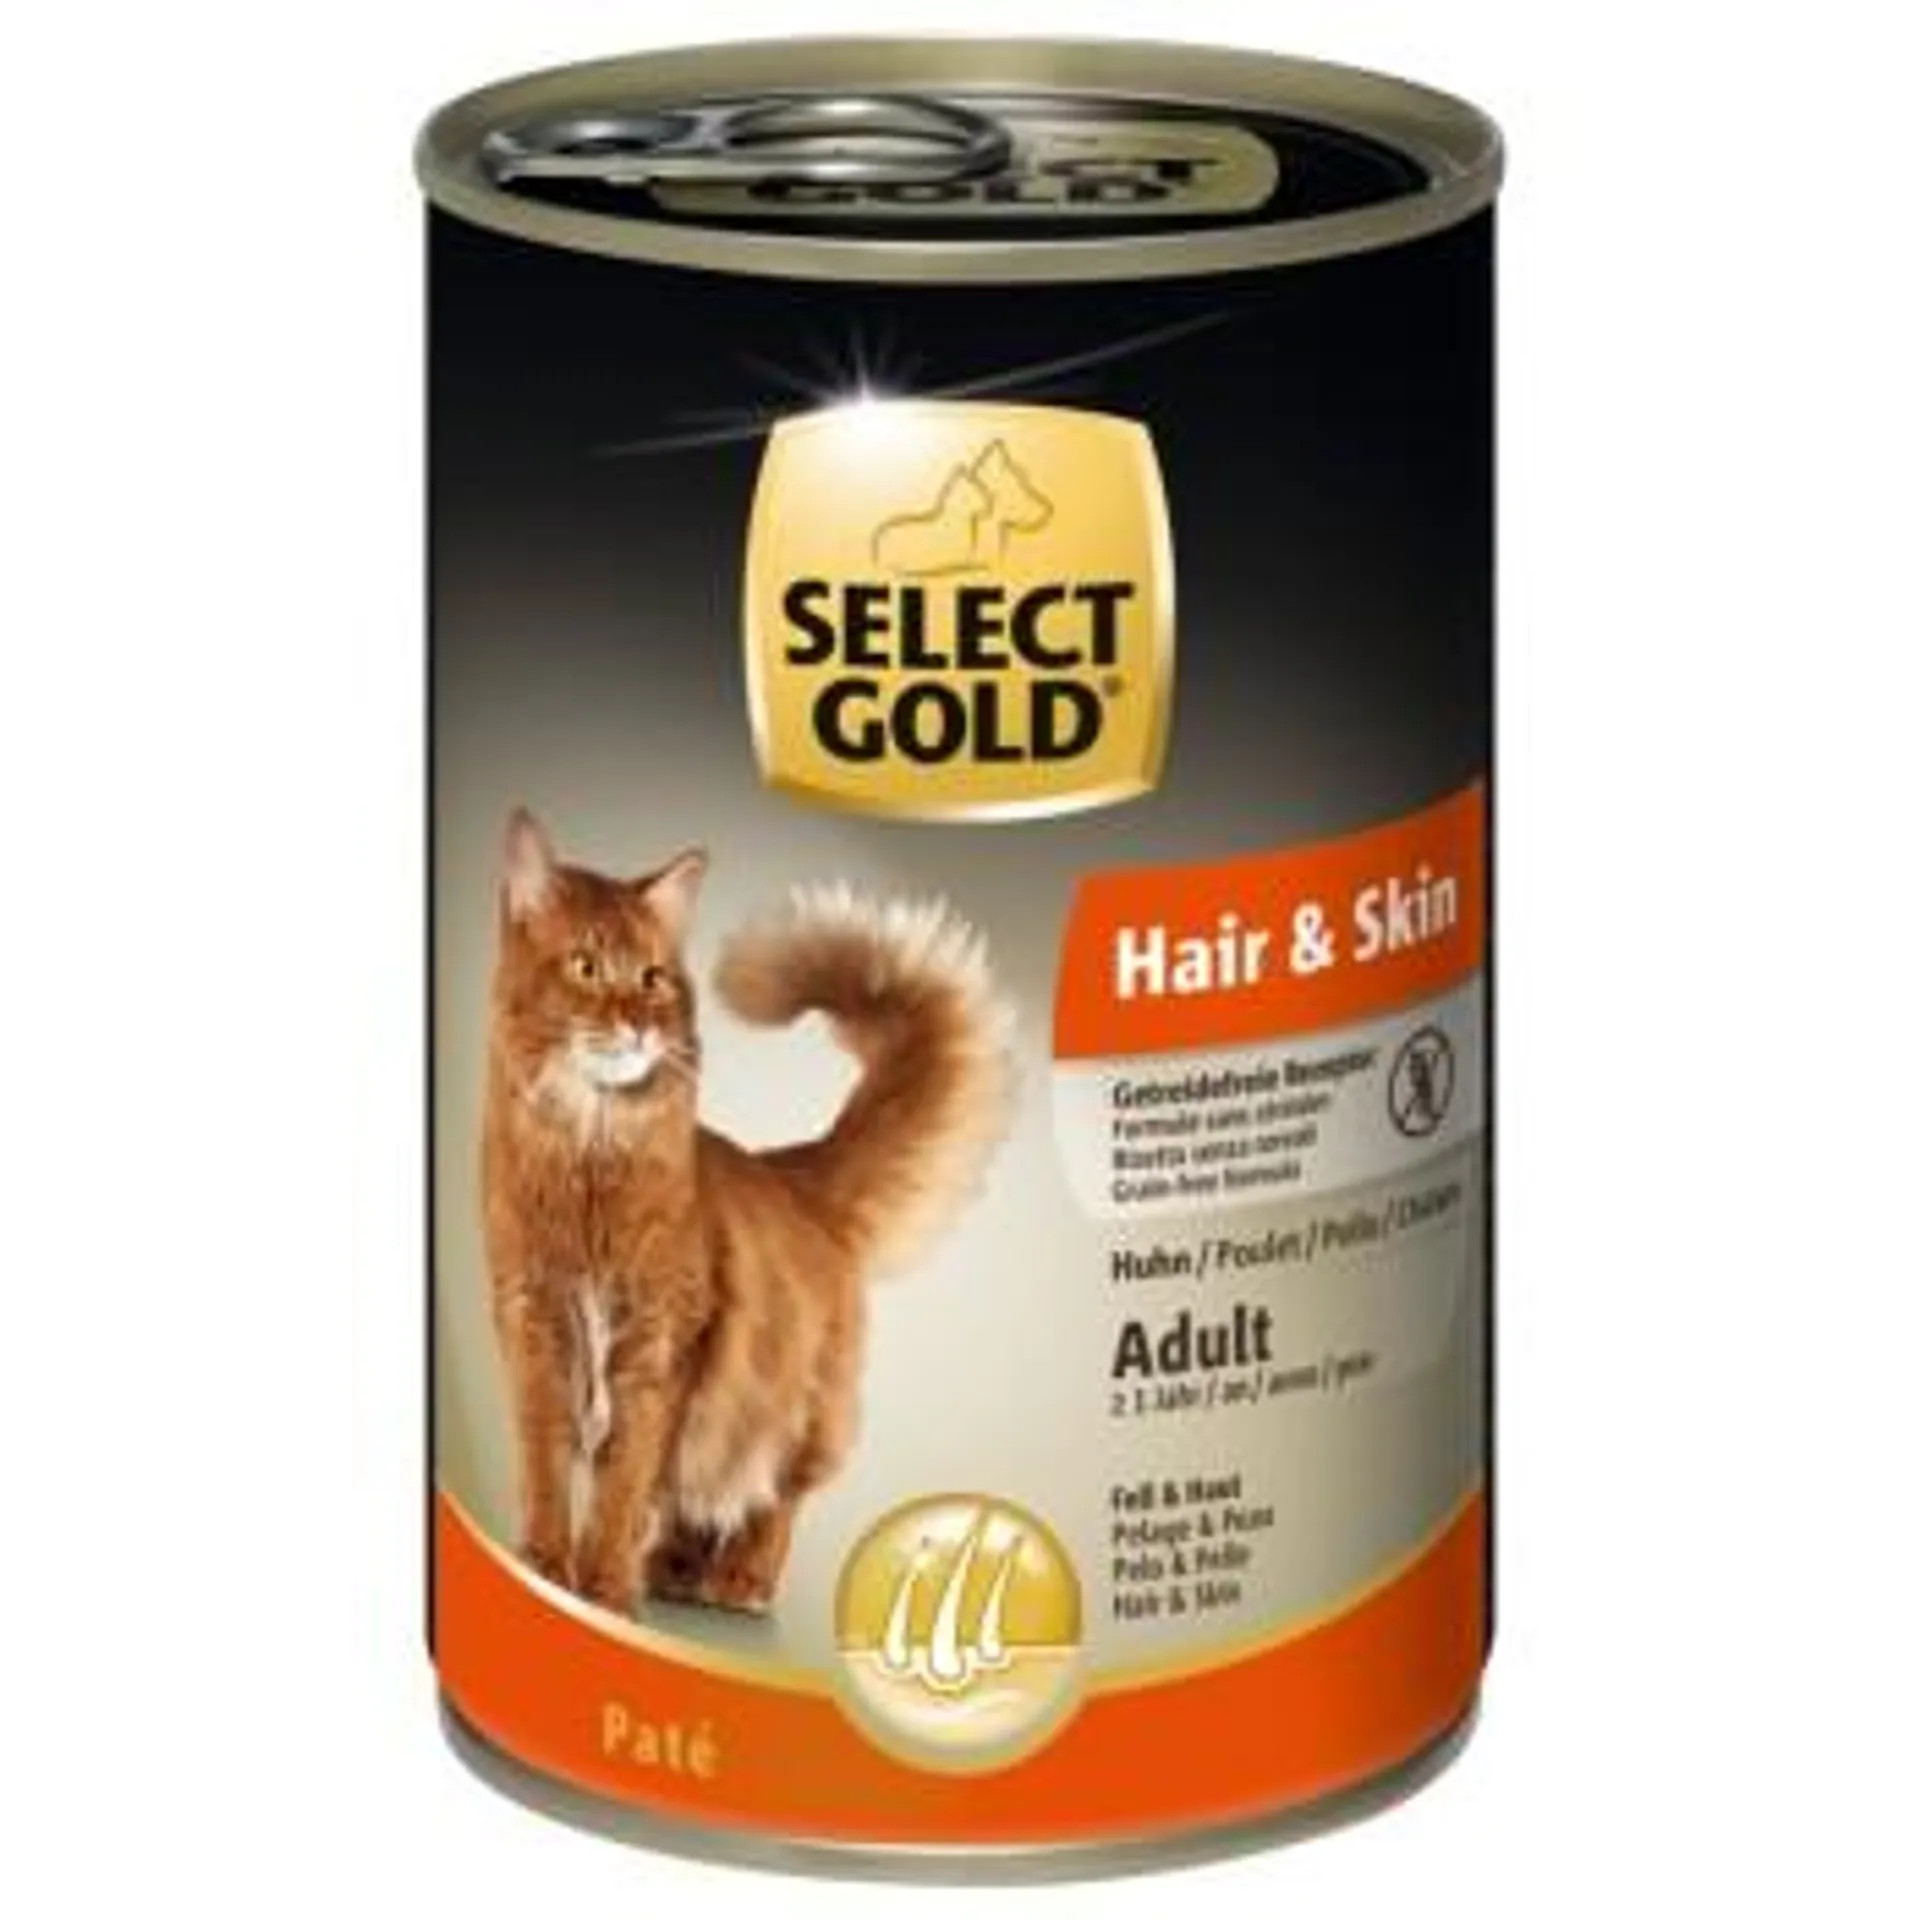 SELECT GOLD Hair & Skin Adult 6x400 g